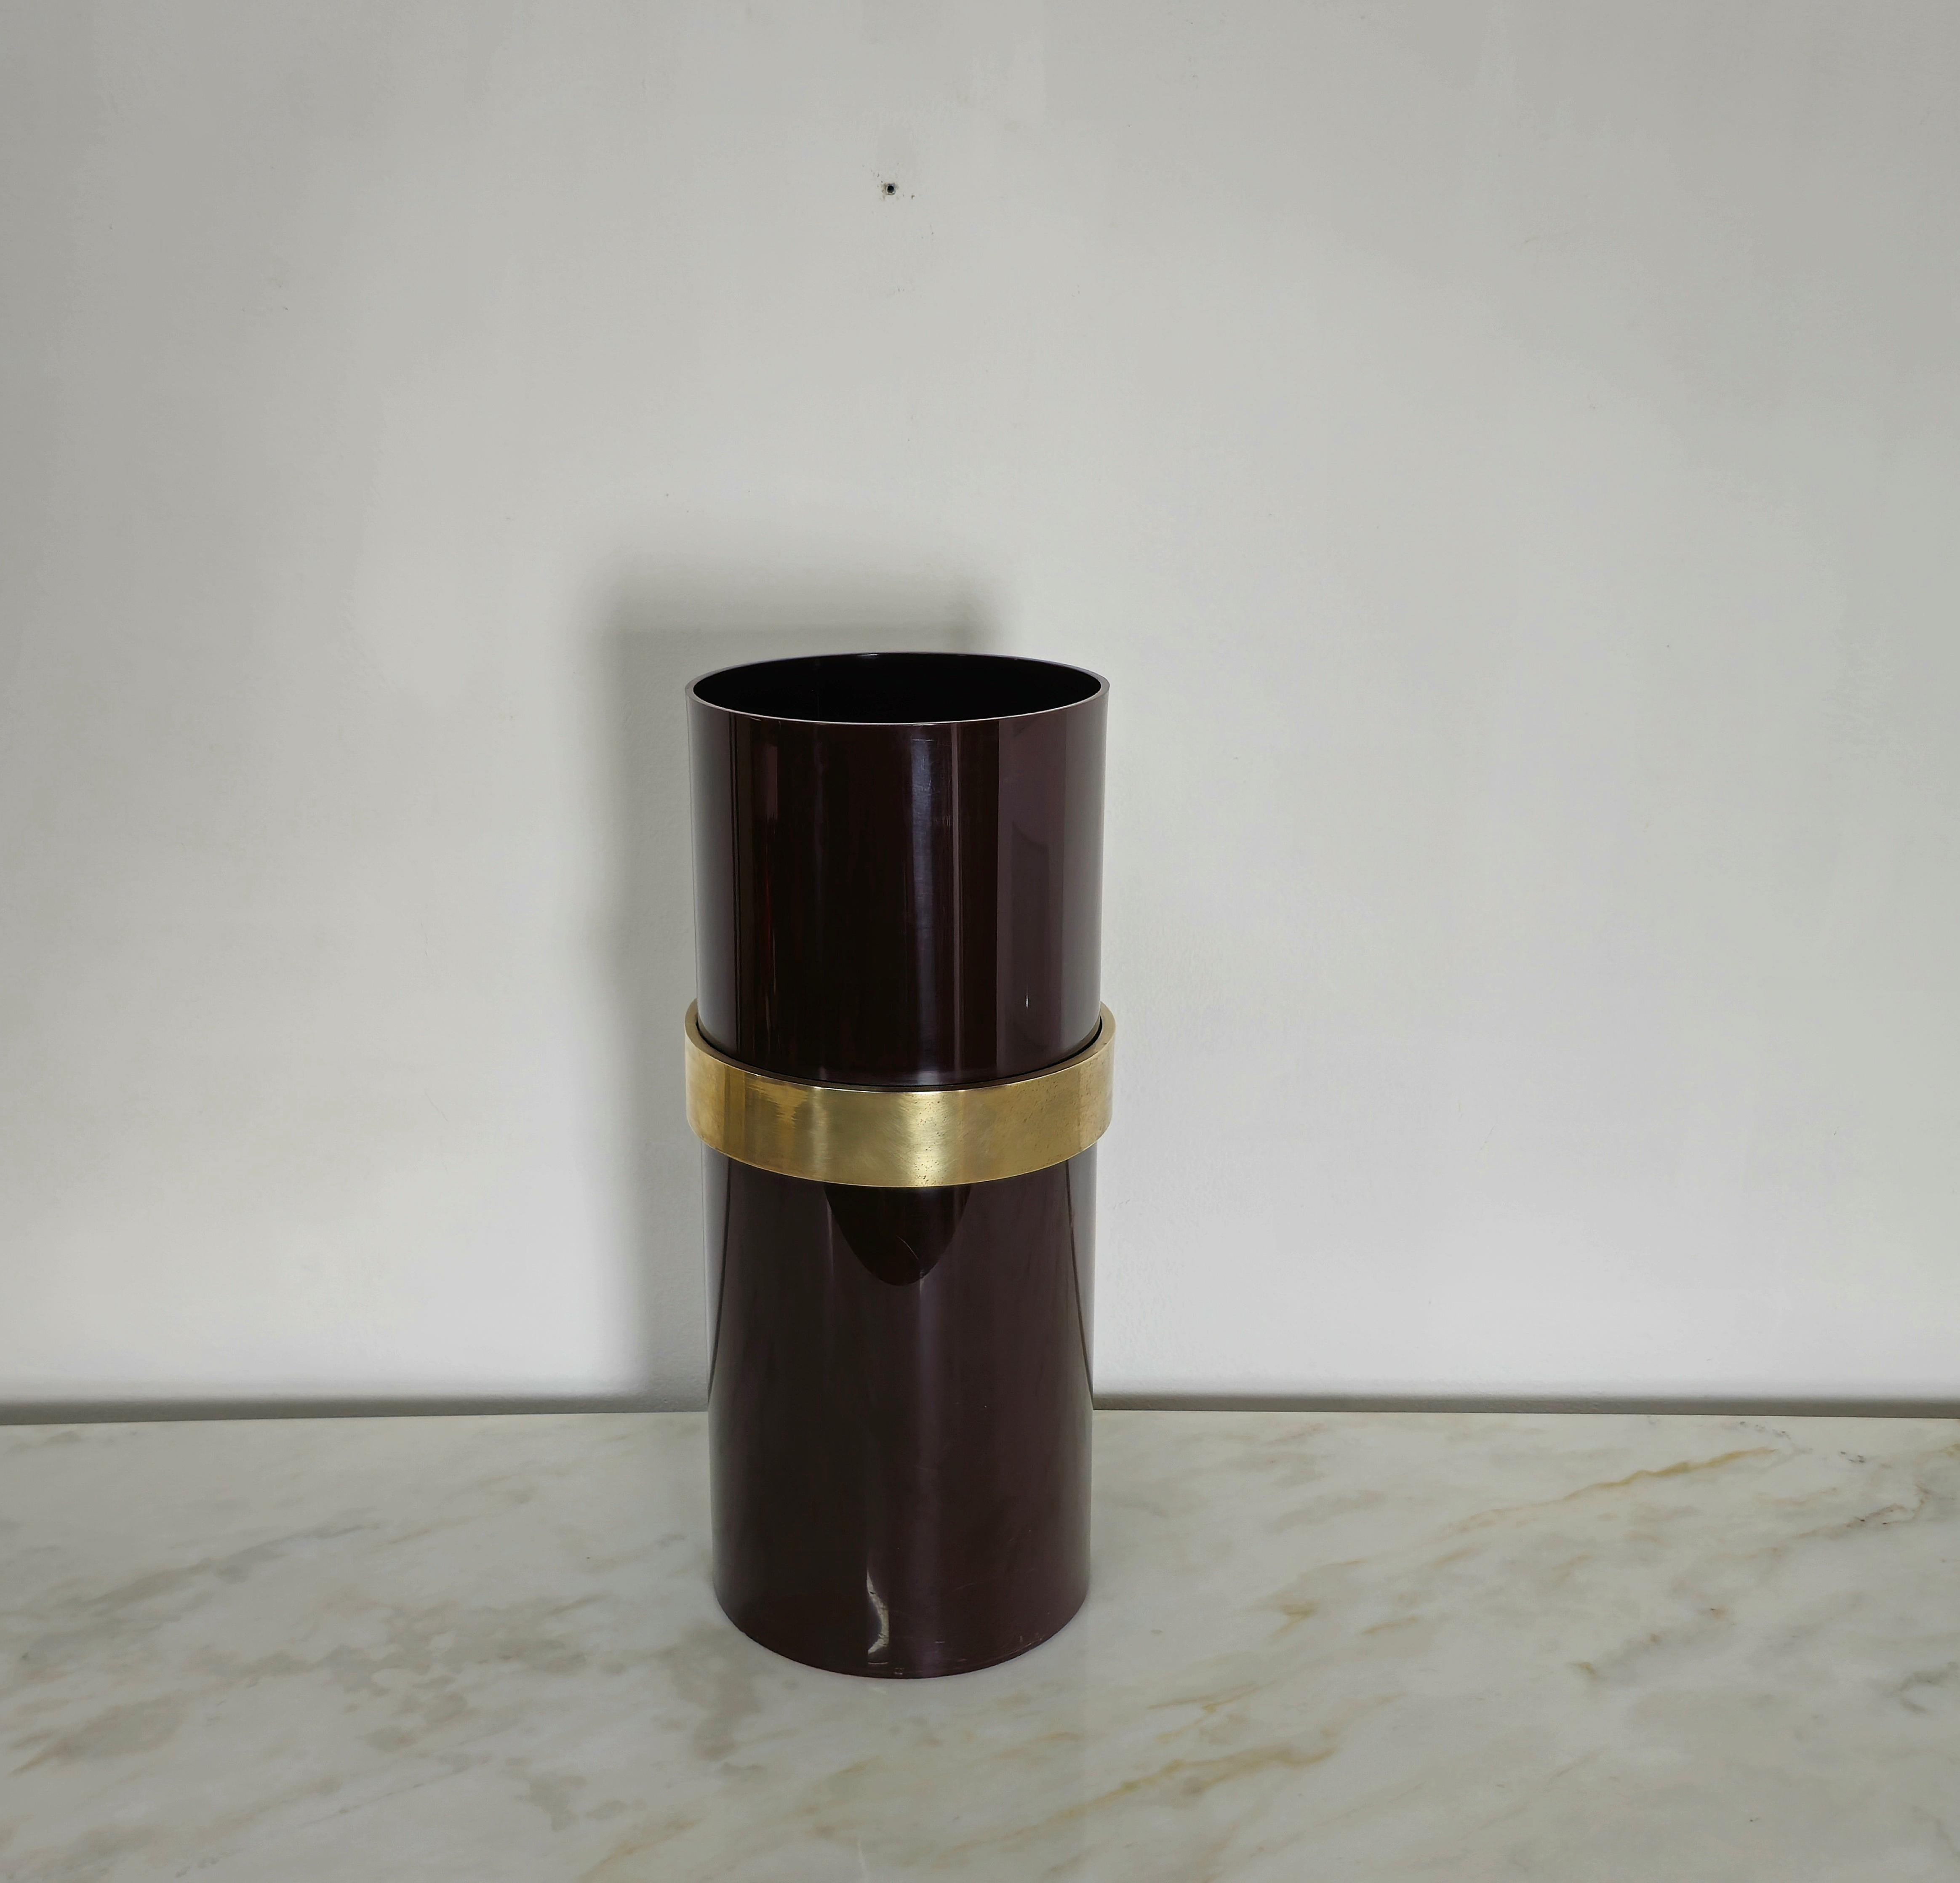 Midcentury Umbrella Stand Brown Plastic Brass Cylindrical Italian Design 1970s For Sale 1